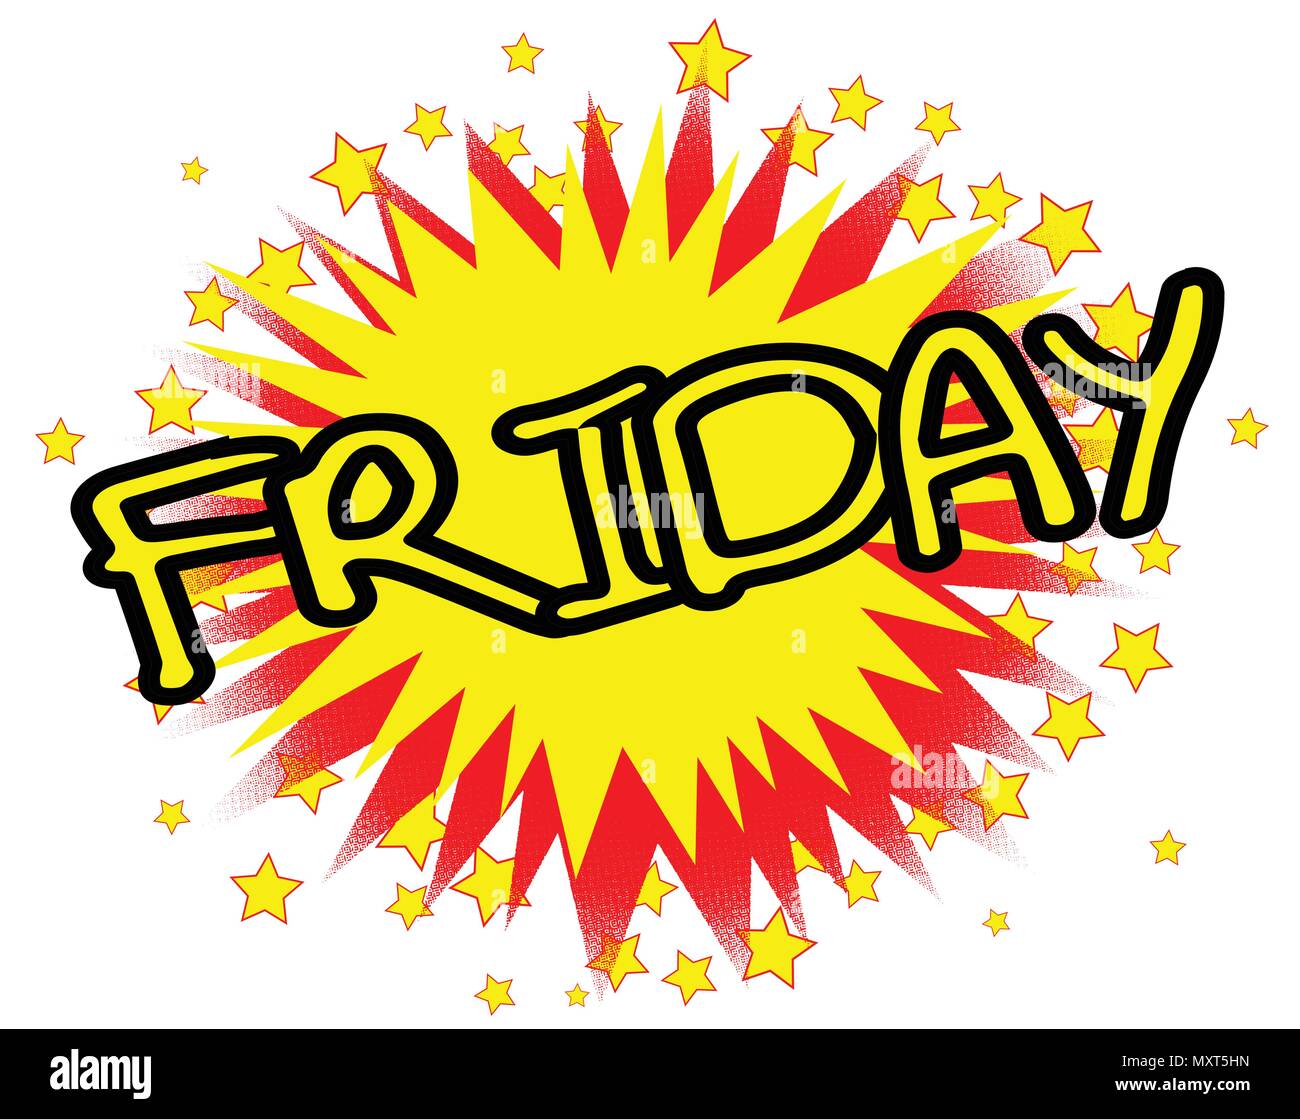 A cartoon style Friday splash explosive motif over a white background Stock Vector